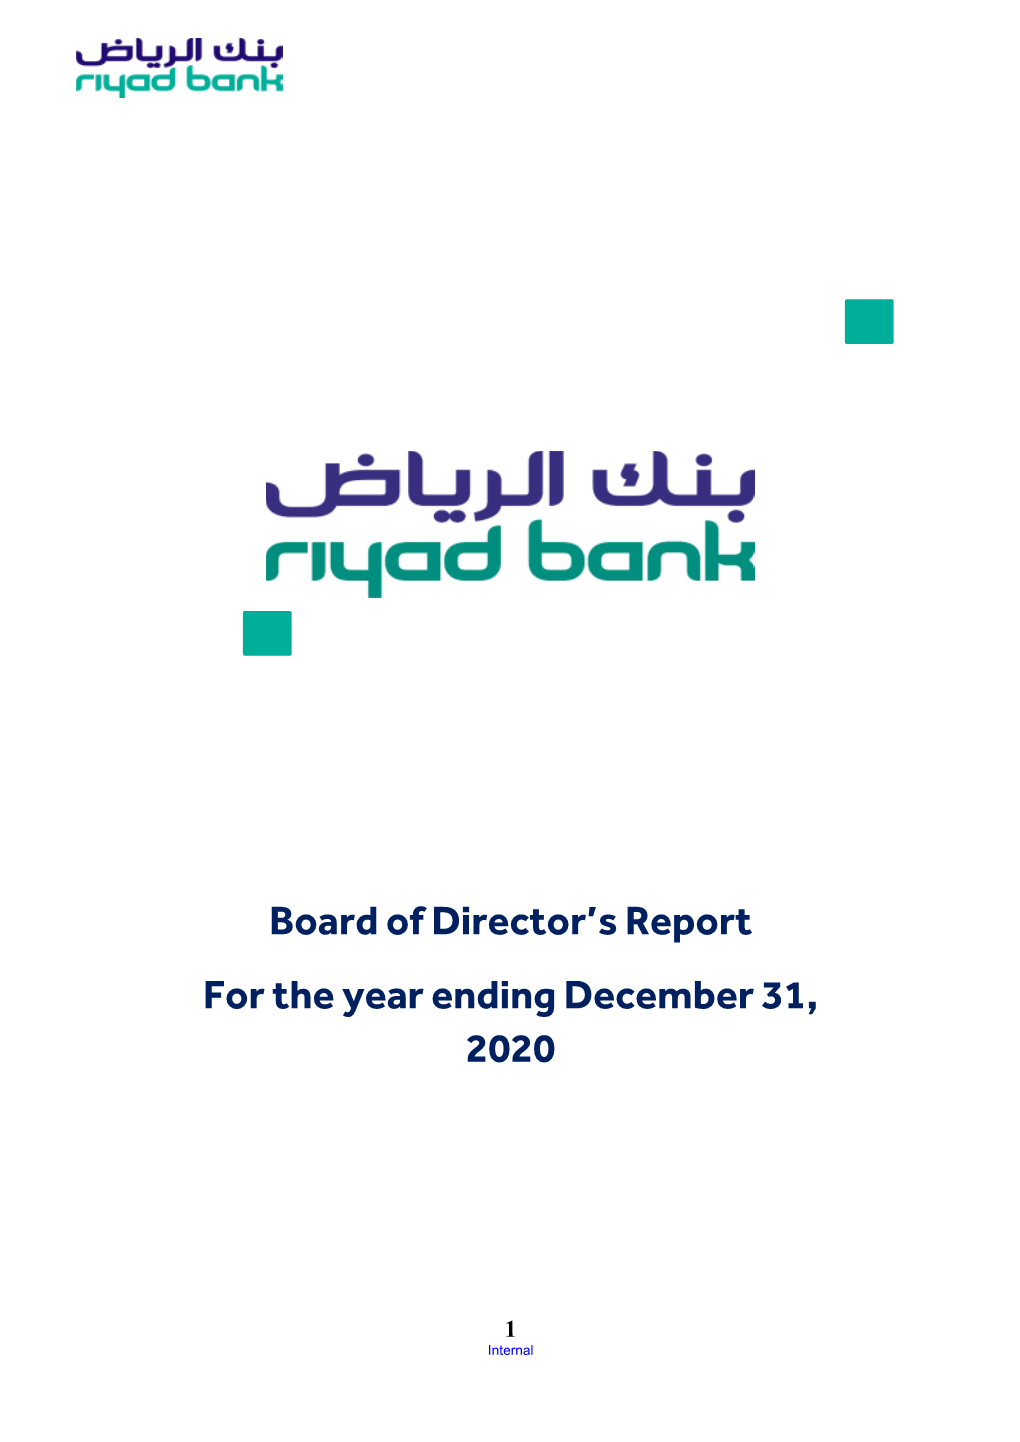 Annual Board of Directors Report for the Year Ended 31/12/2020